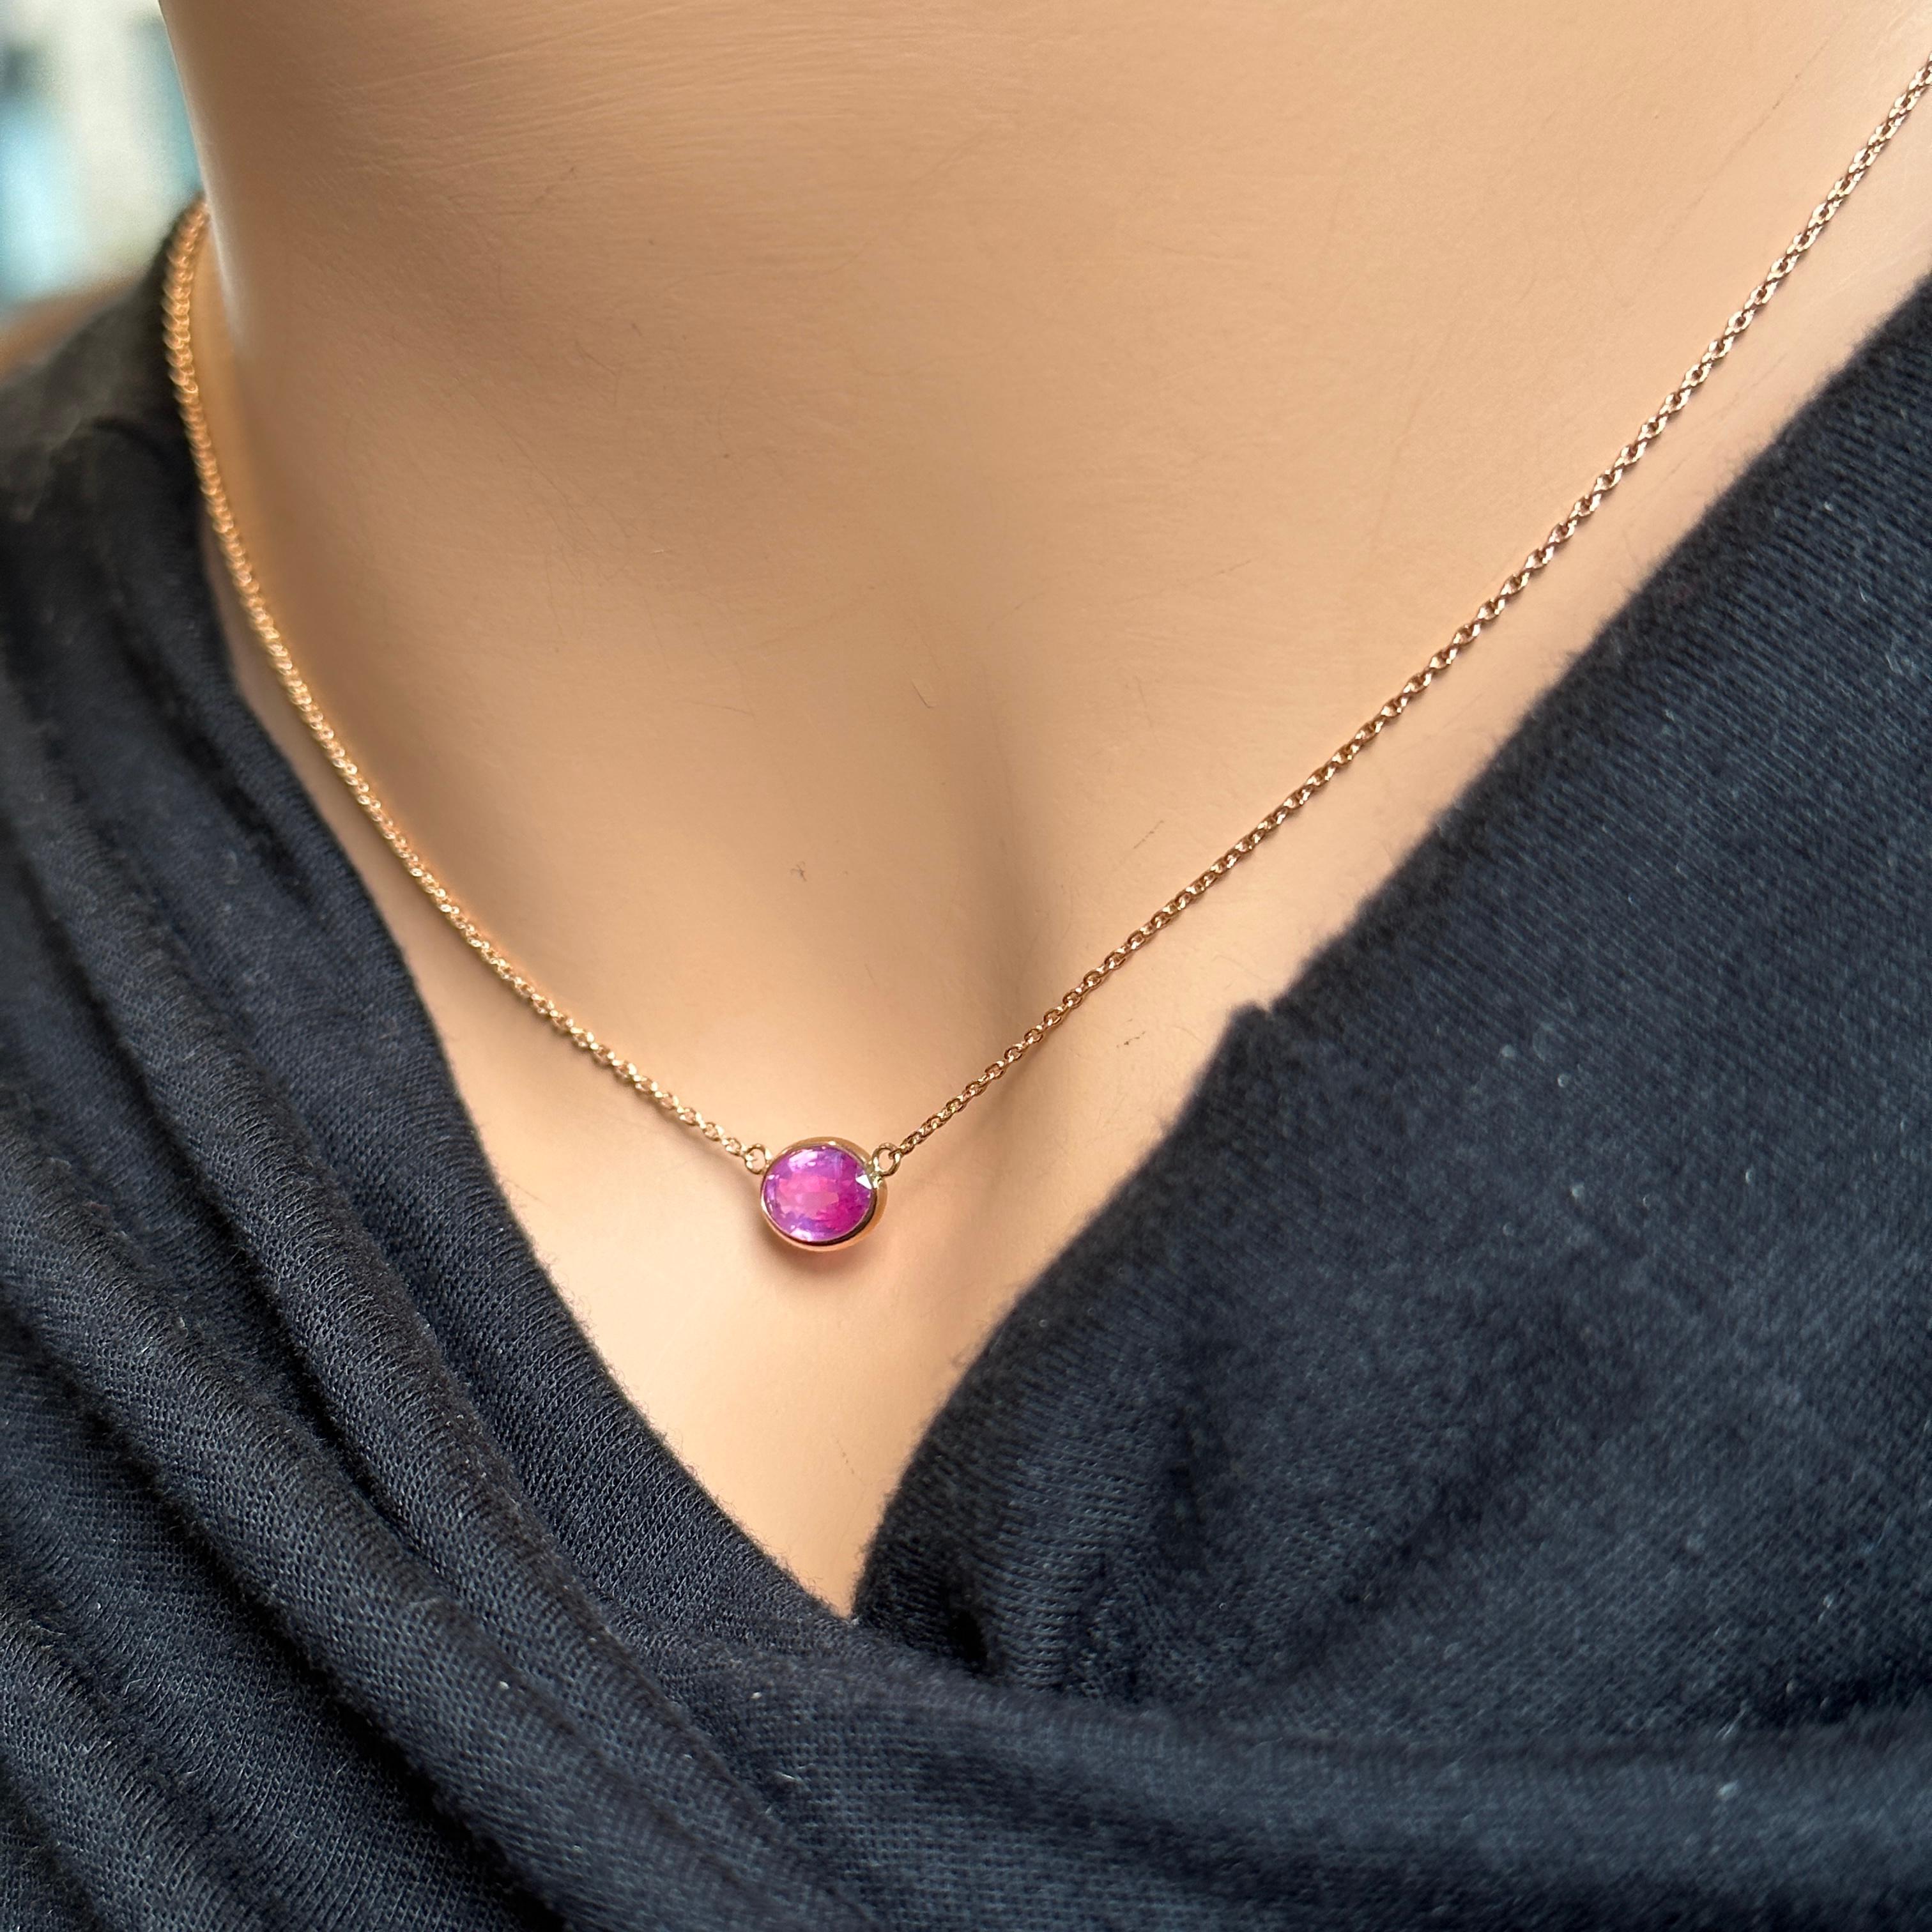 Contemporary 1.74 Ct Weight Certified Pink Sapphire Oval Cut Solitaire Necklace In 14K RG For Sale